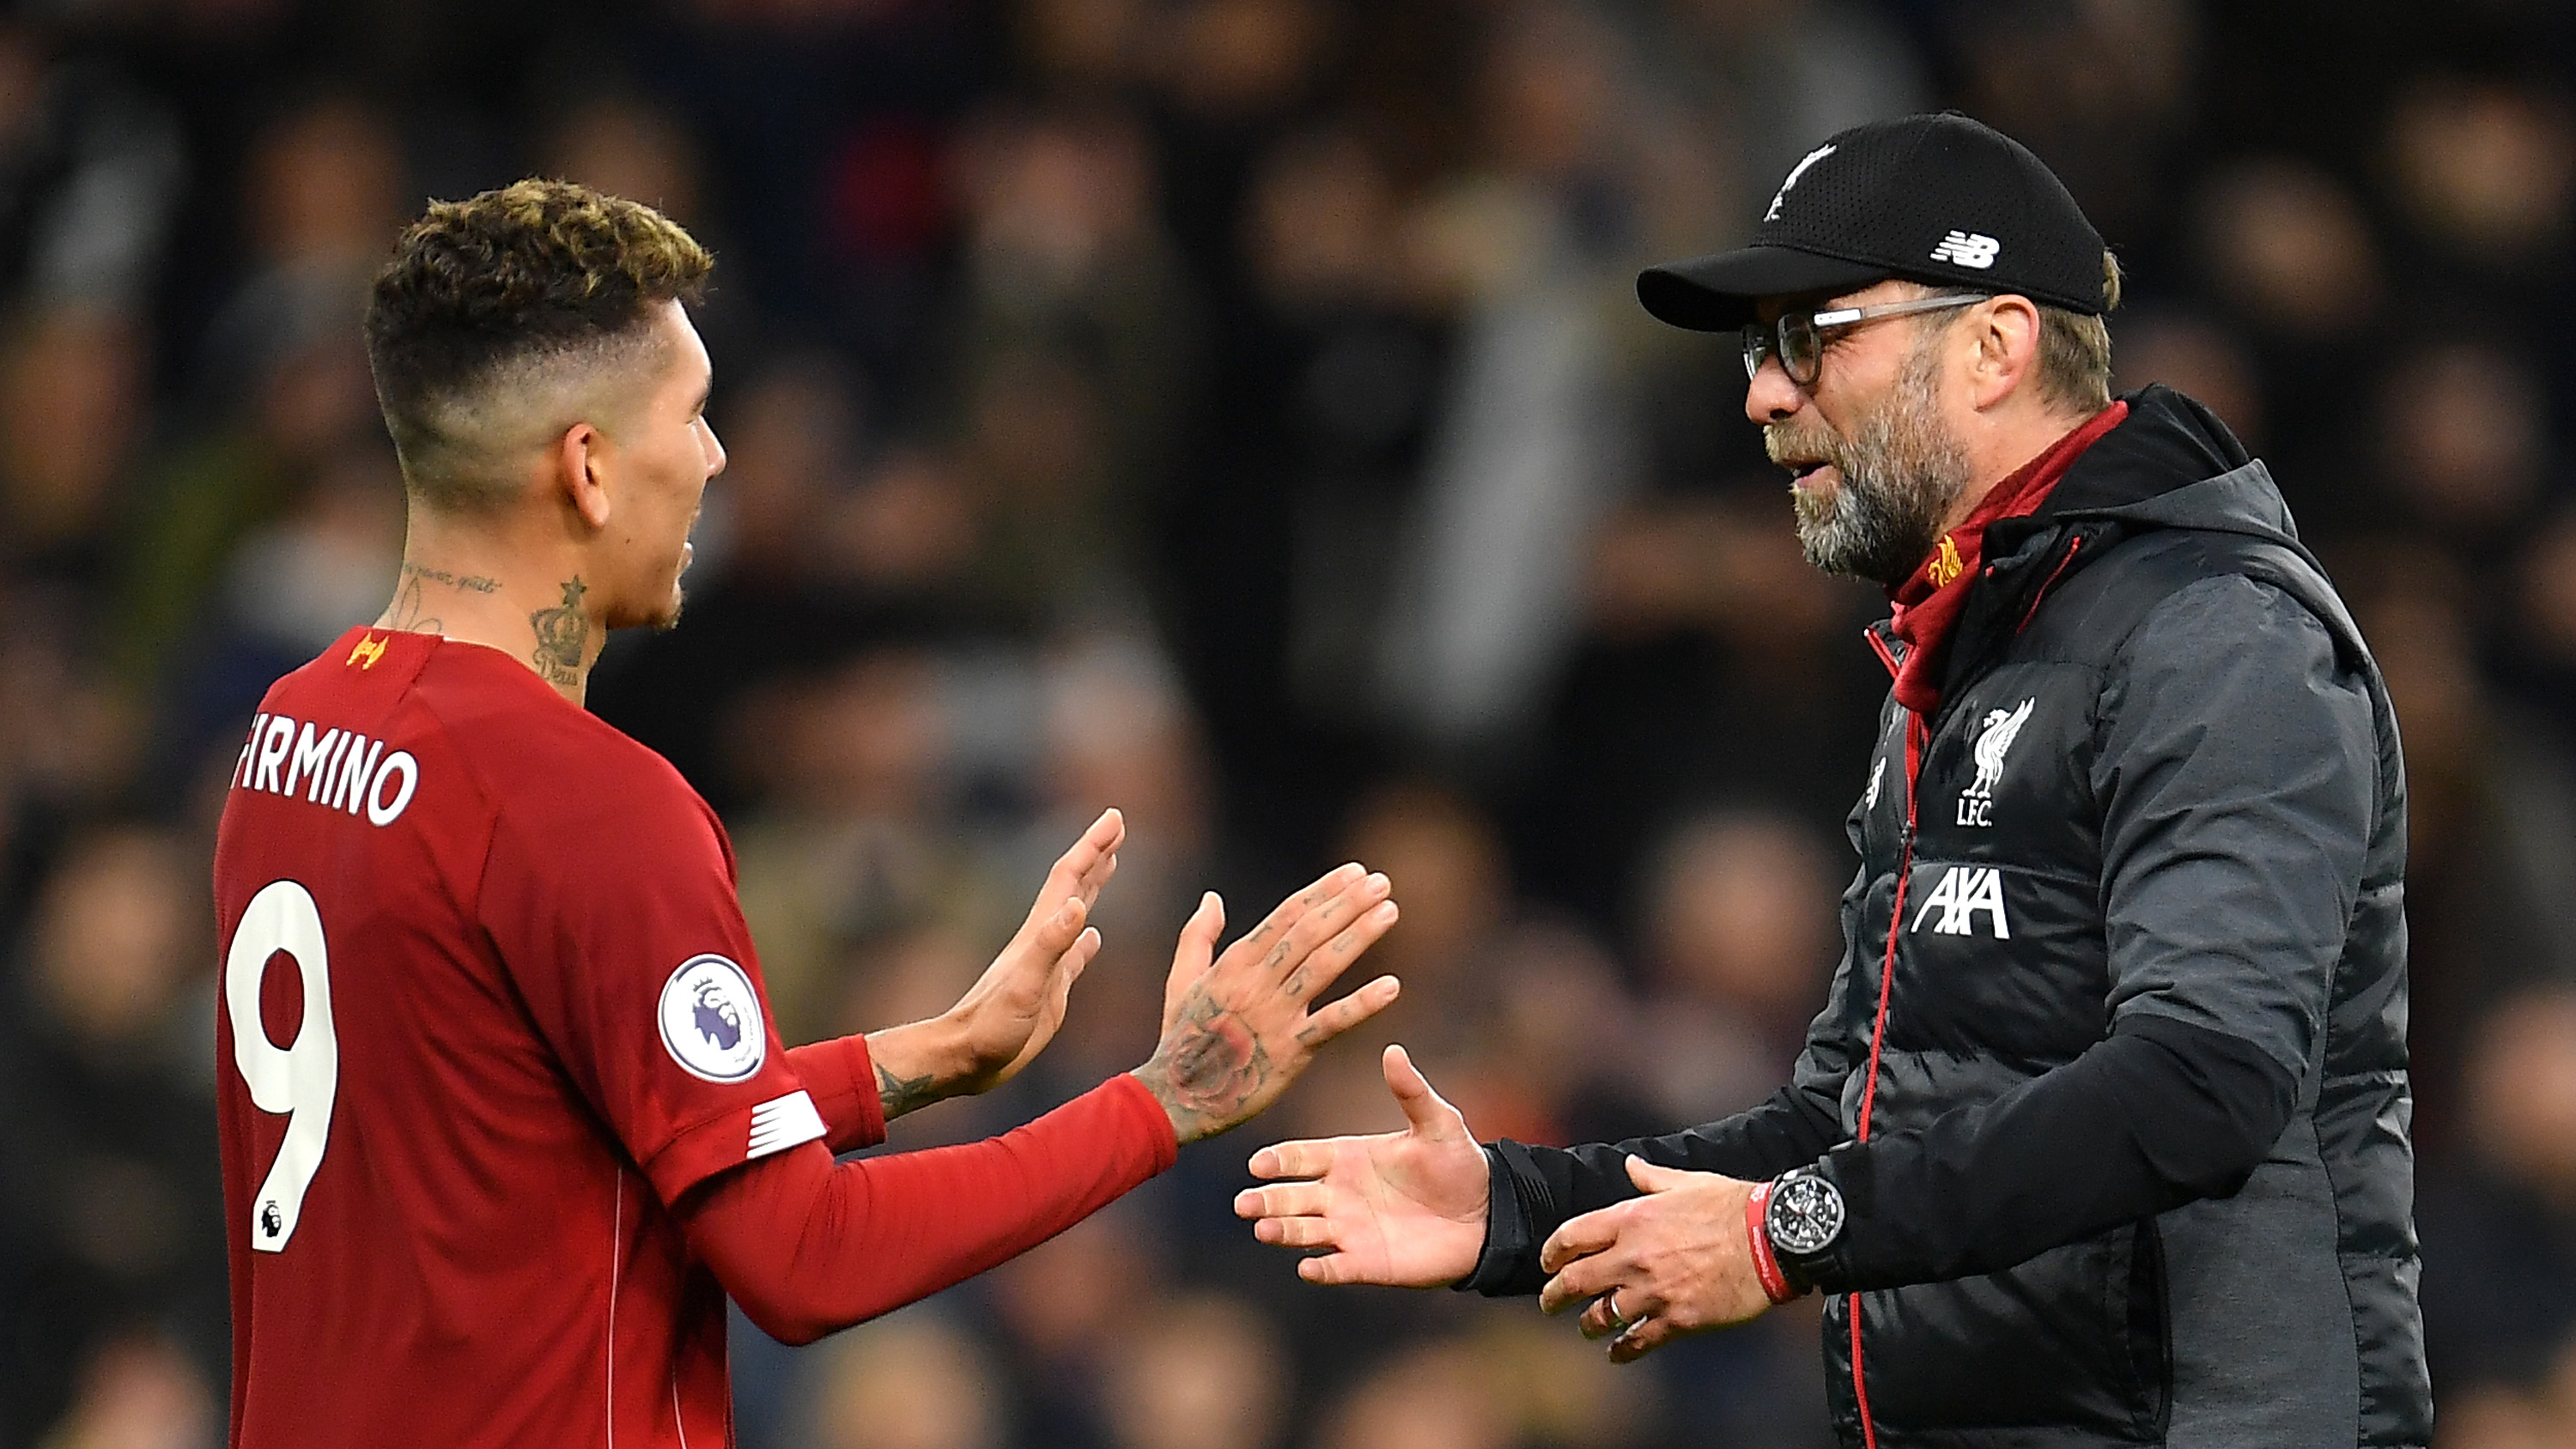 'It's not important who scores' - Klopp plays down Firmino's Liverpool home goal drought